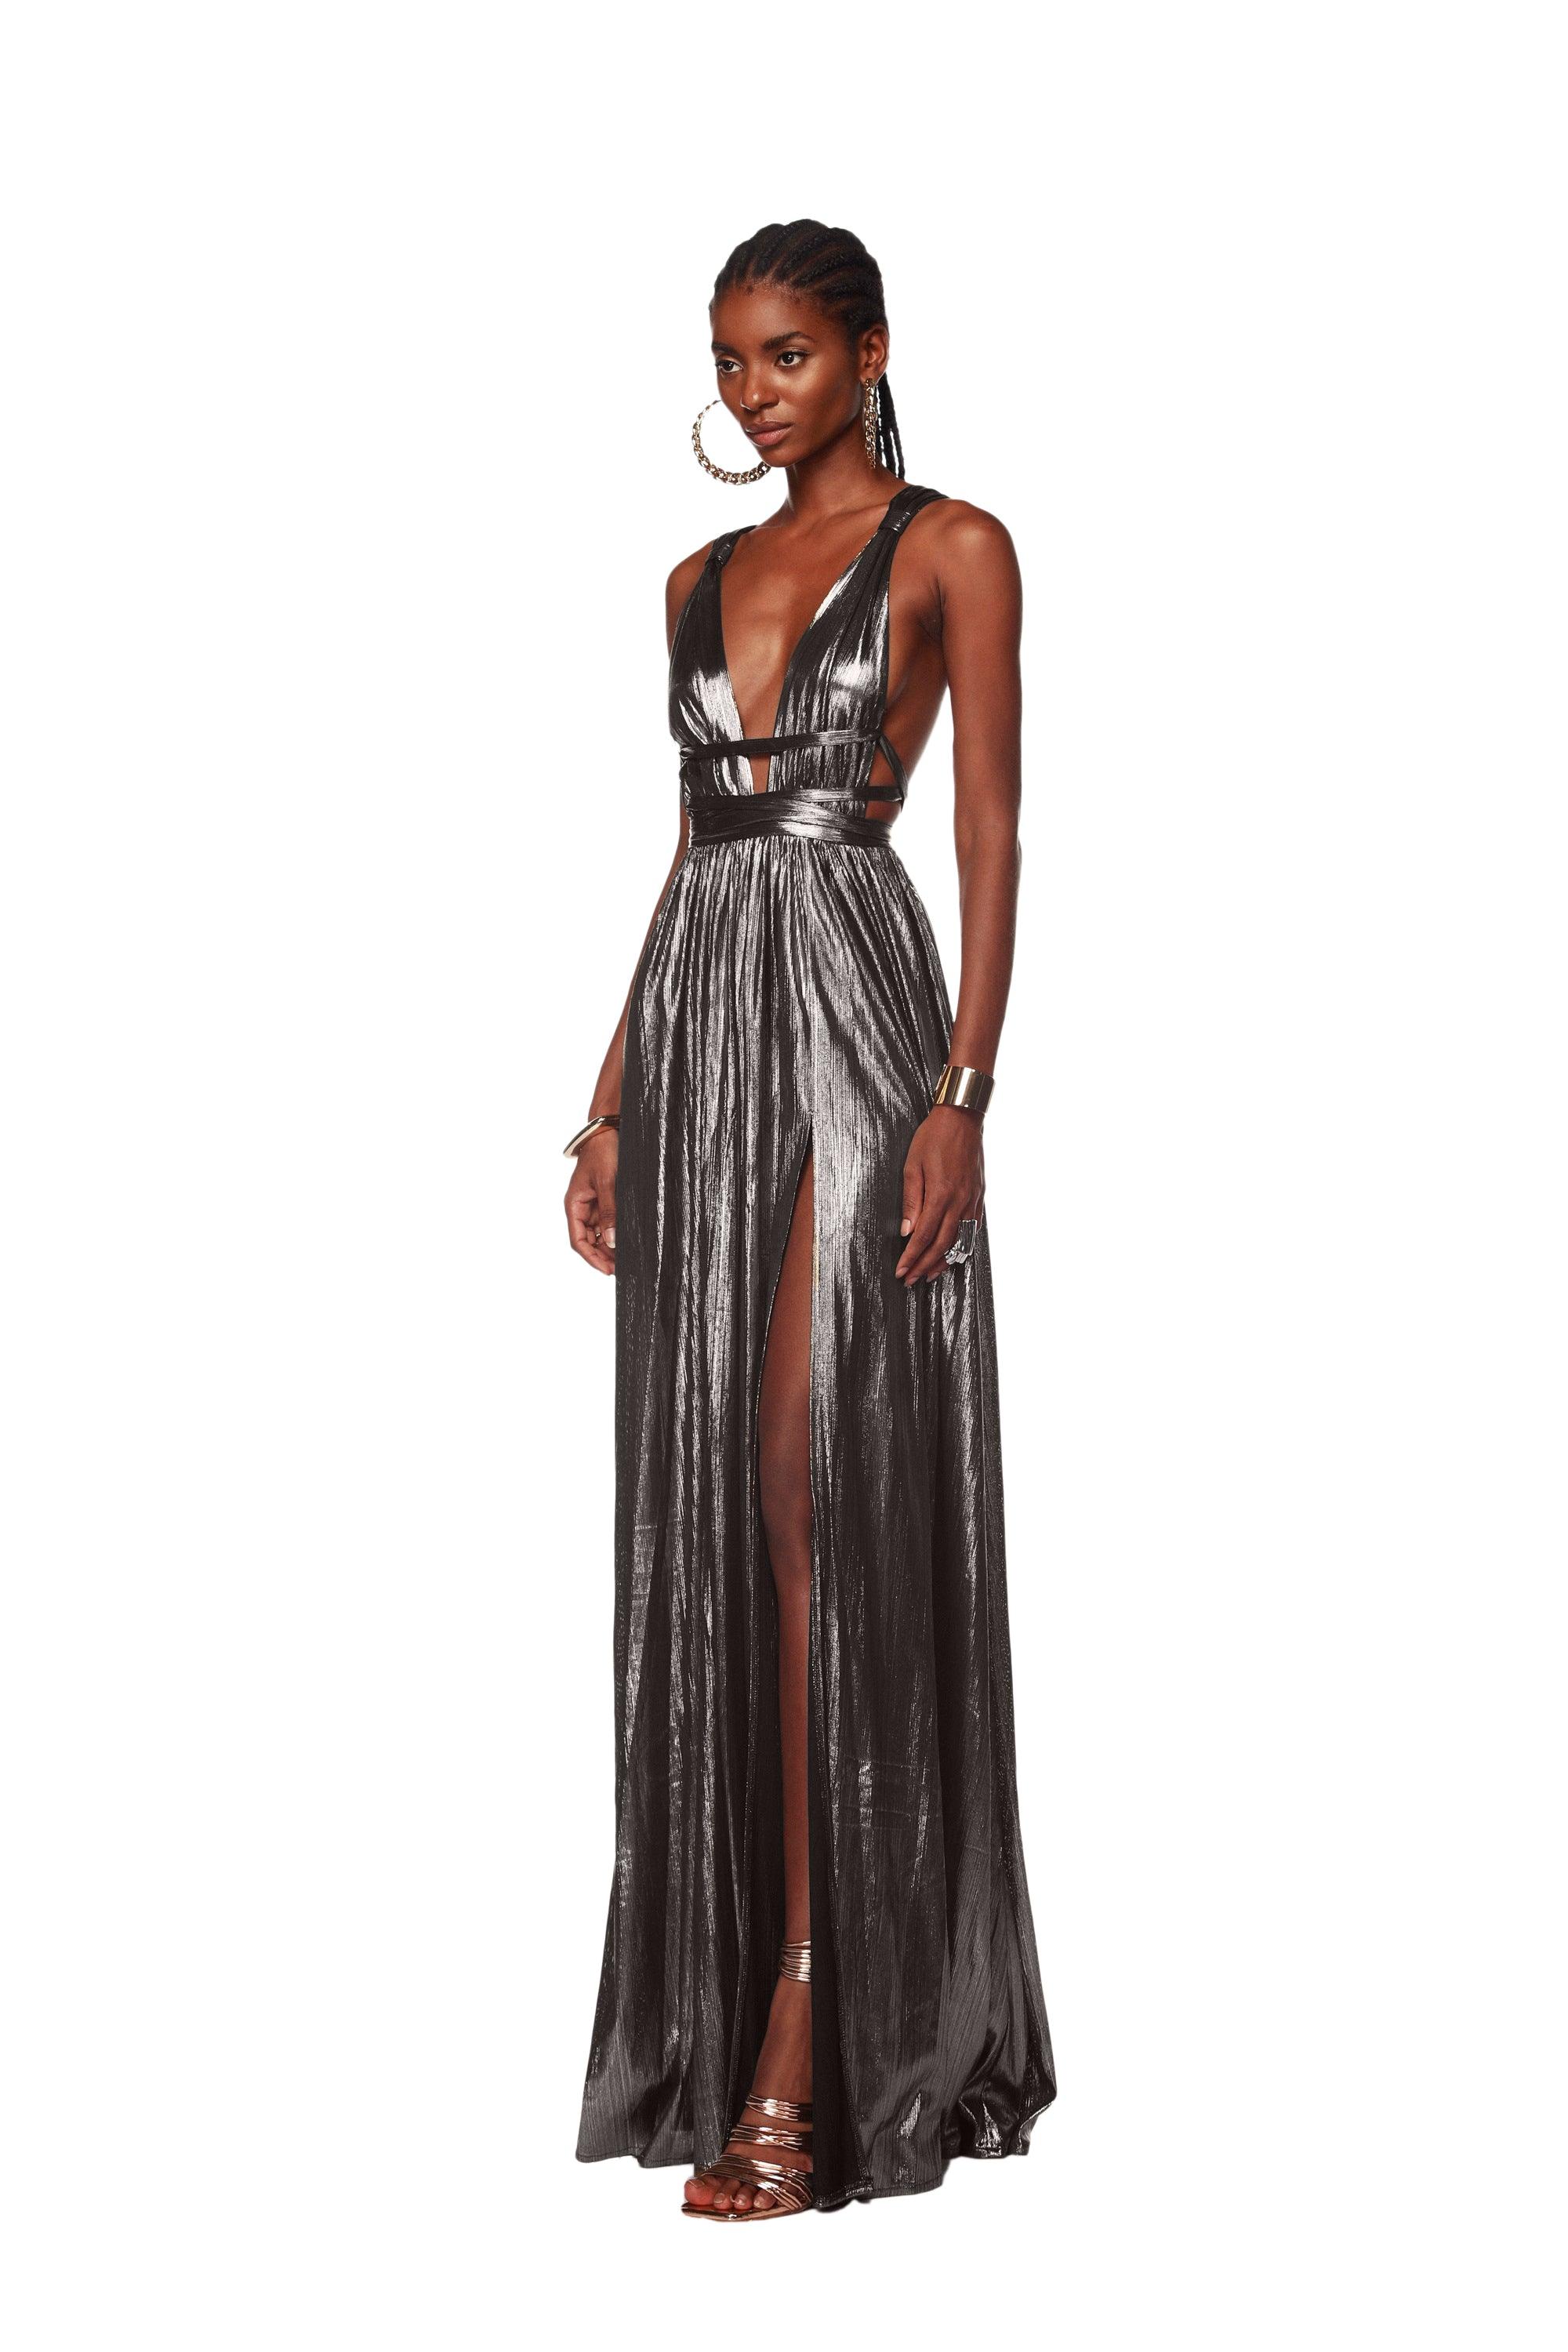 Lia Stublla Sweetheart Nude/Silver Sequin Gown - Dresses 4 Hire